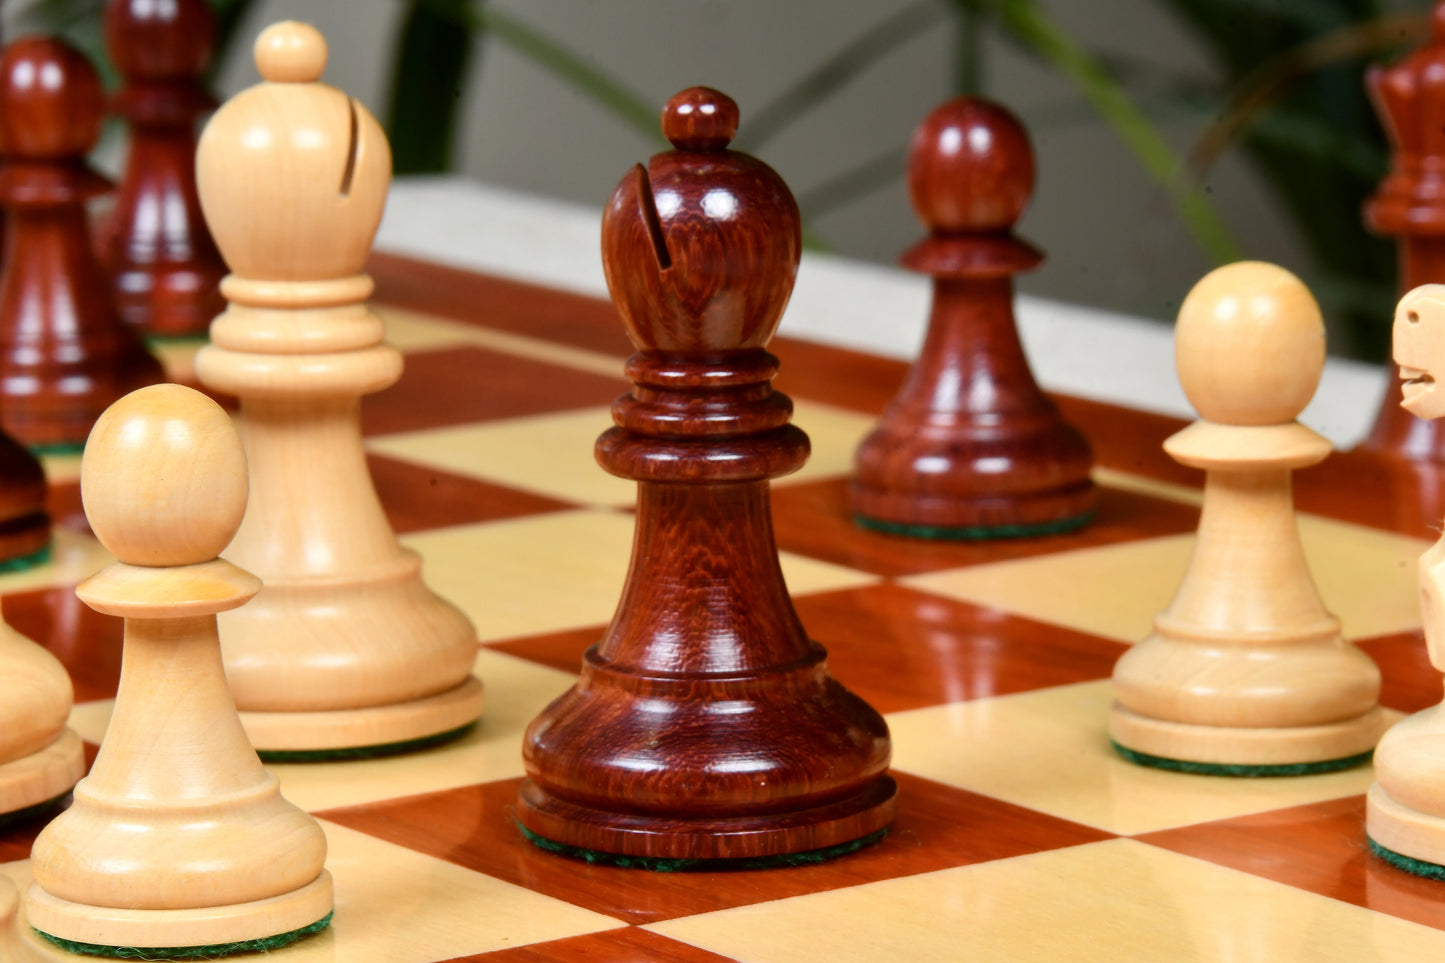 1972 Reproduced Fischer-Spassky Staunton Pattern Chess Pieces V2.0 in Bud Rosewood & Boxwood - 3.75" King